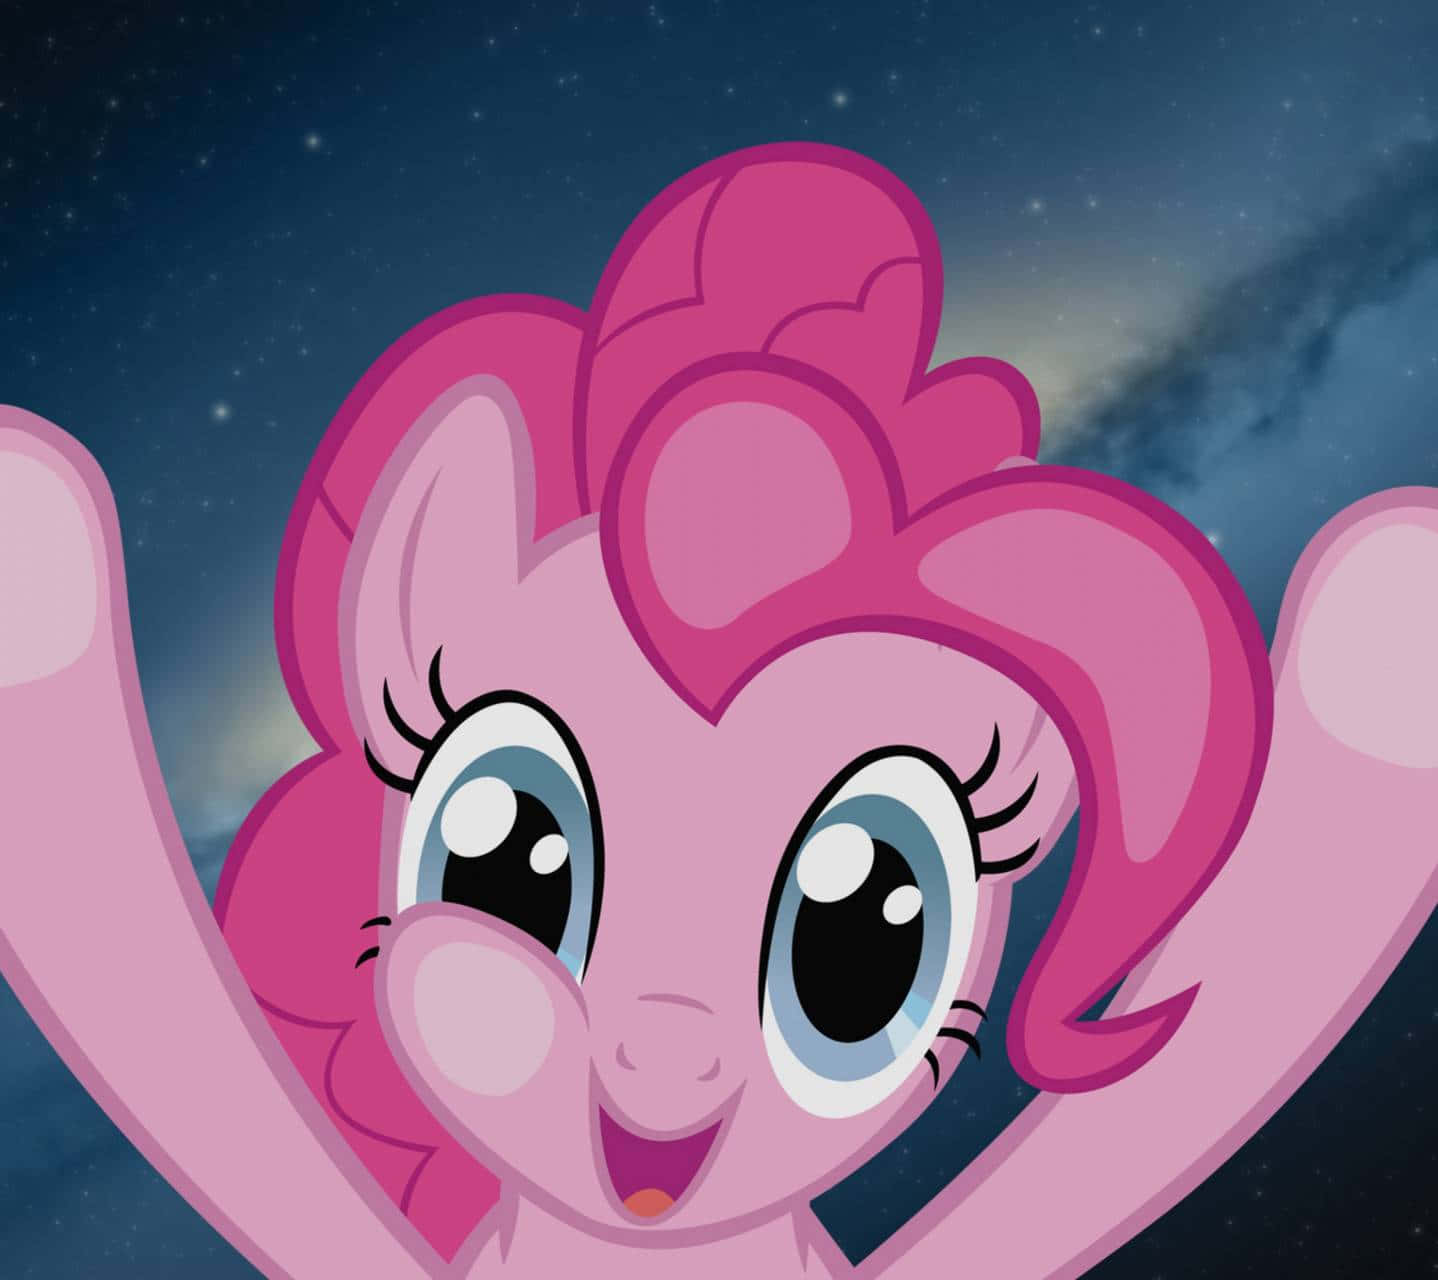 Pinkie Pie Is Incredibly Cheerful and Happy!